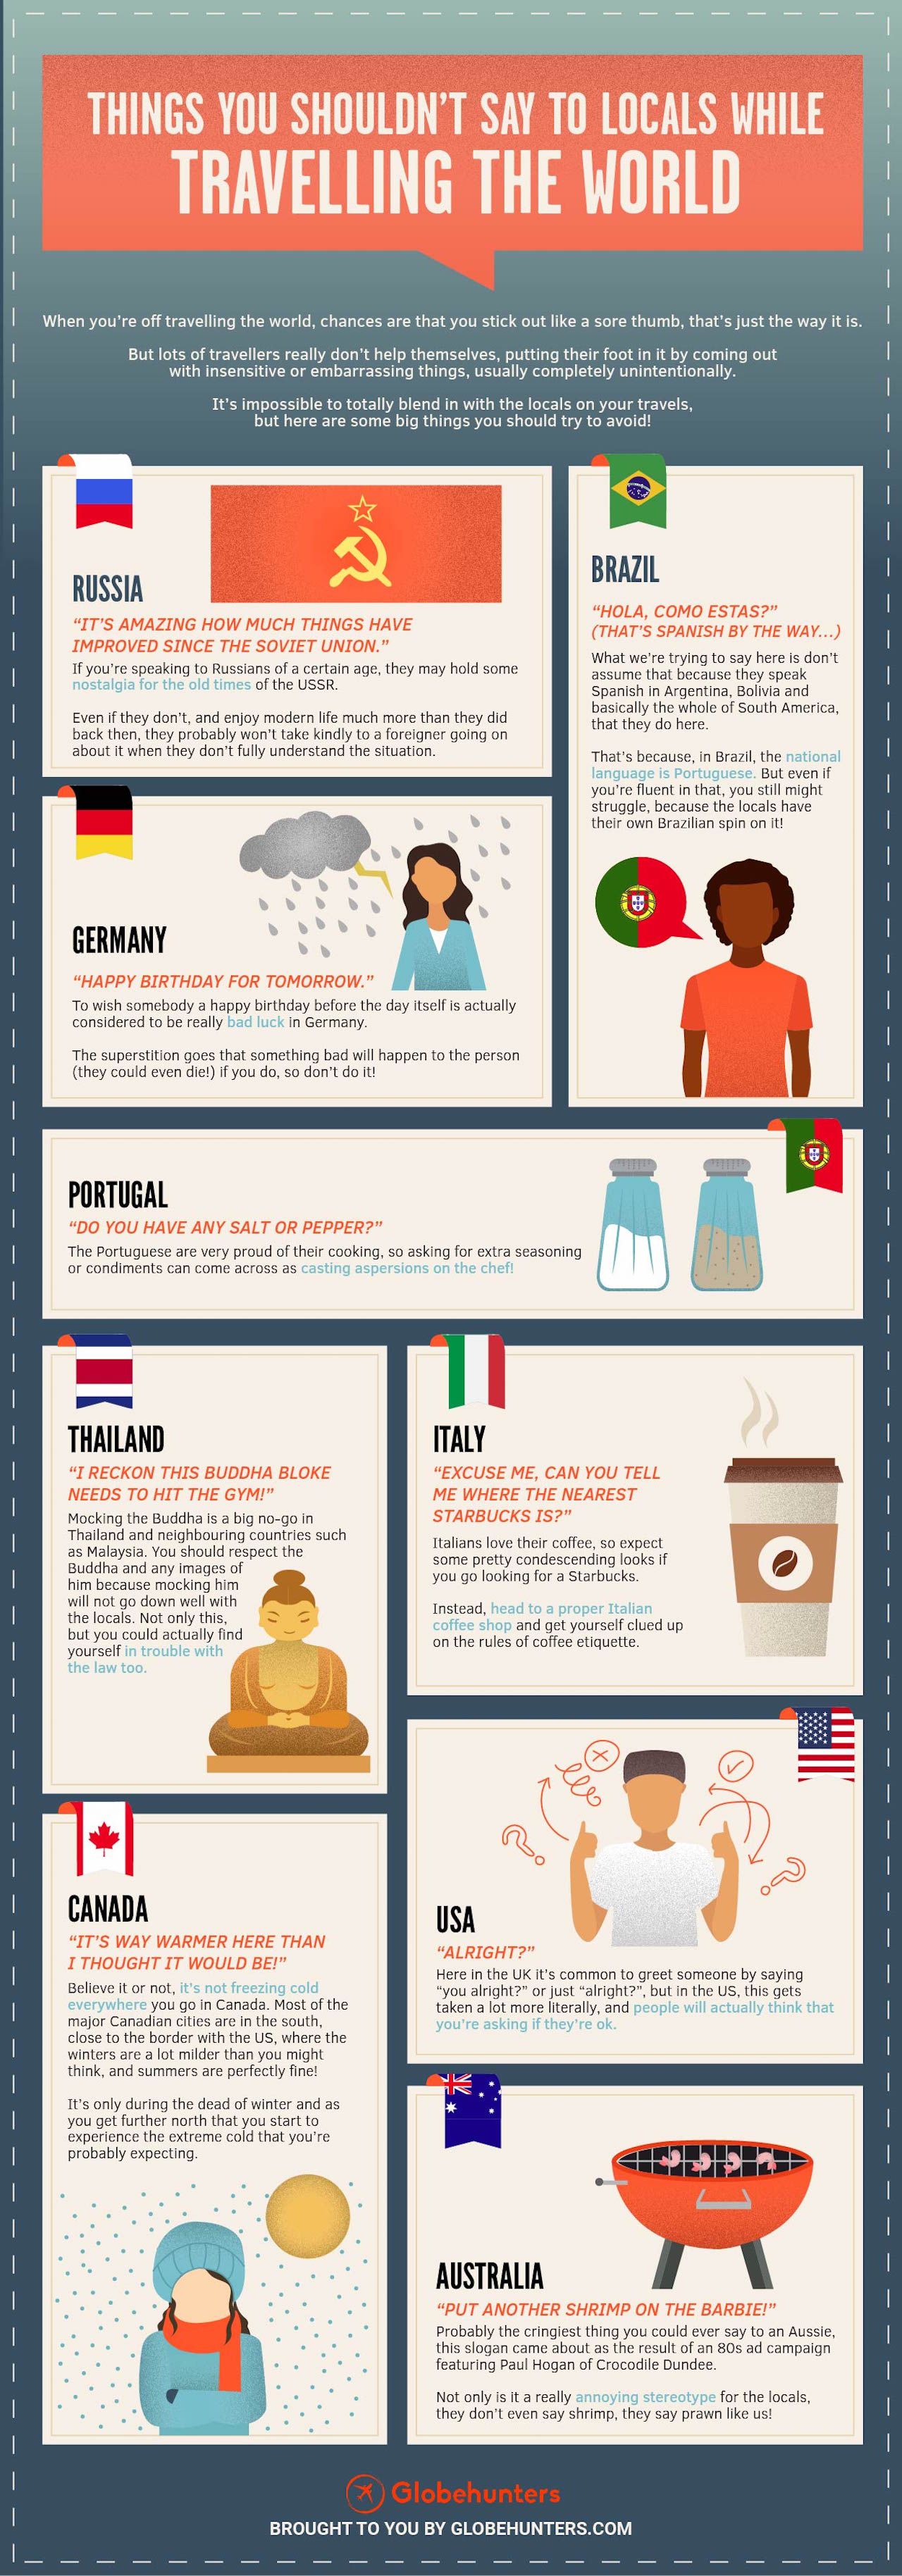 things-you-shouldnt-say-to-locals-infographic